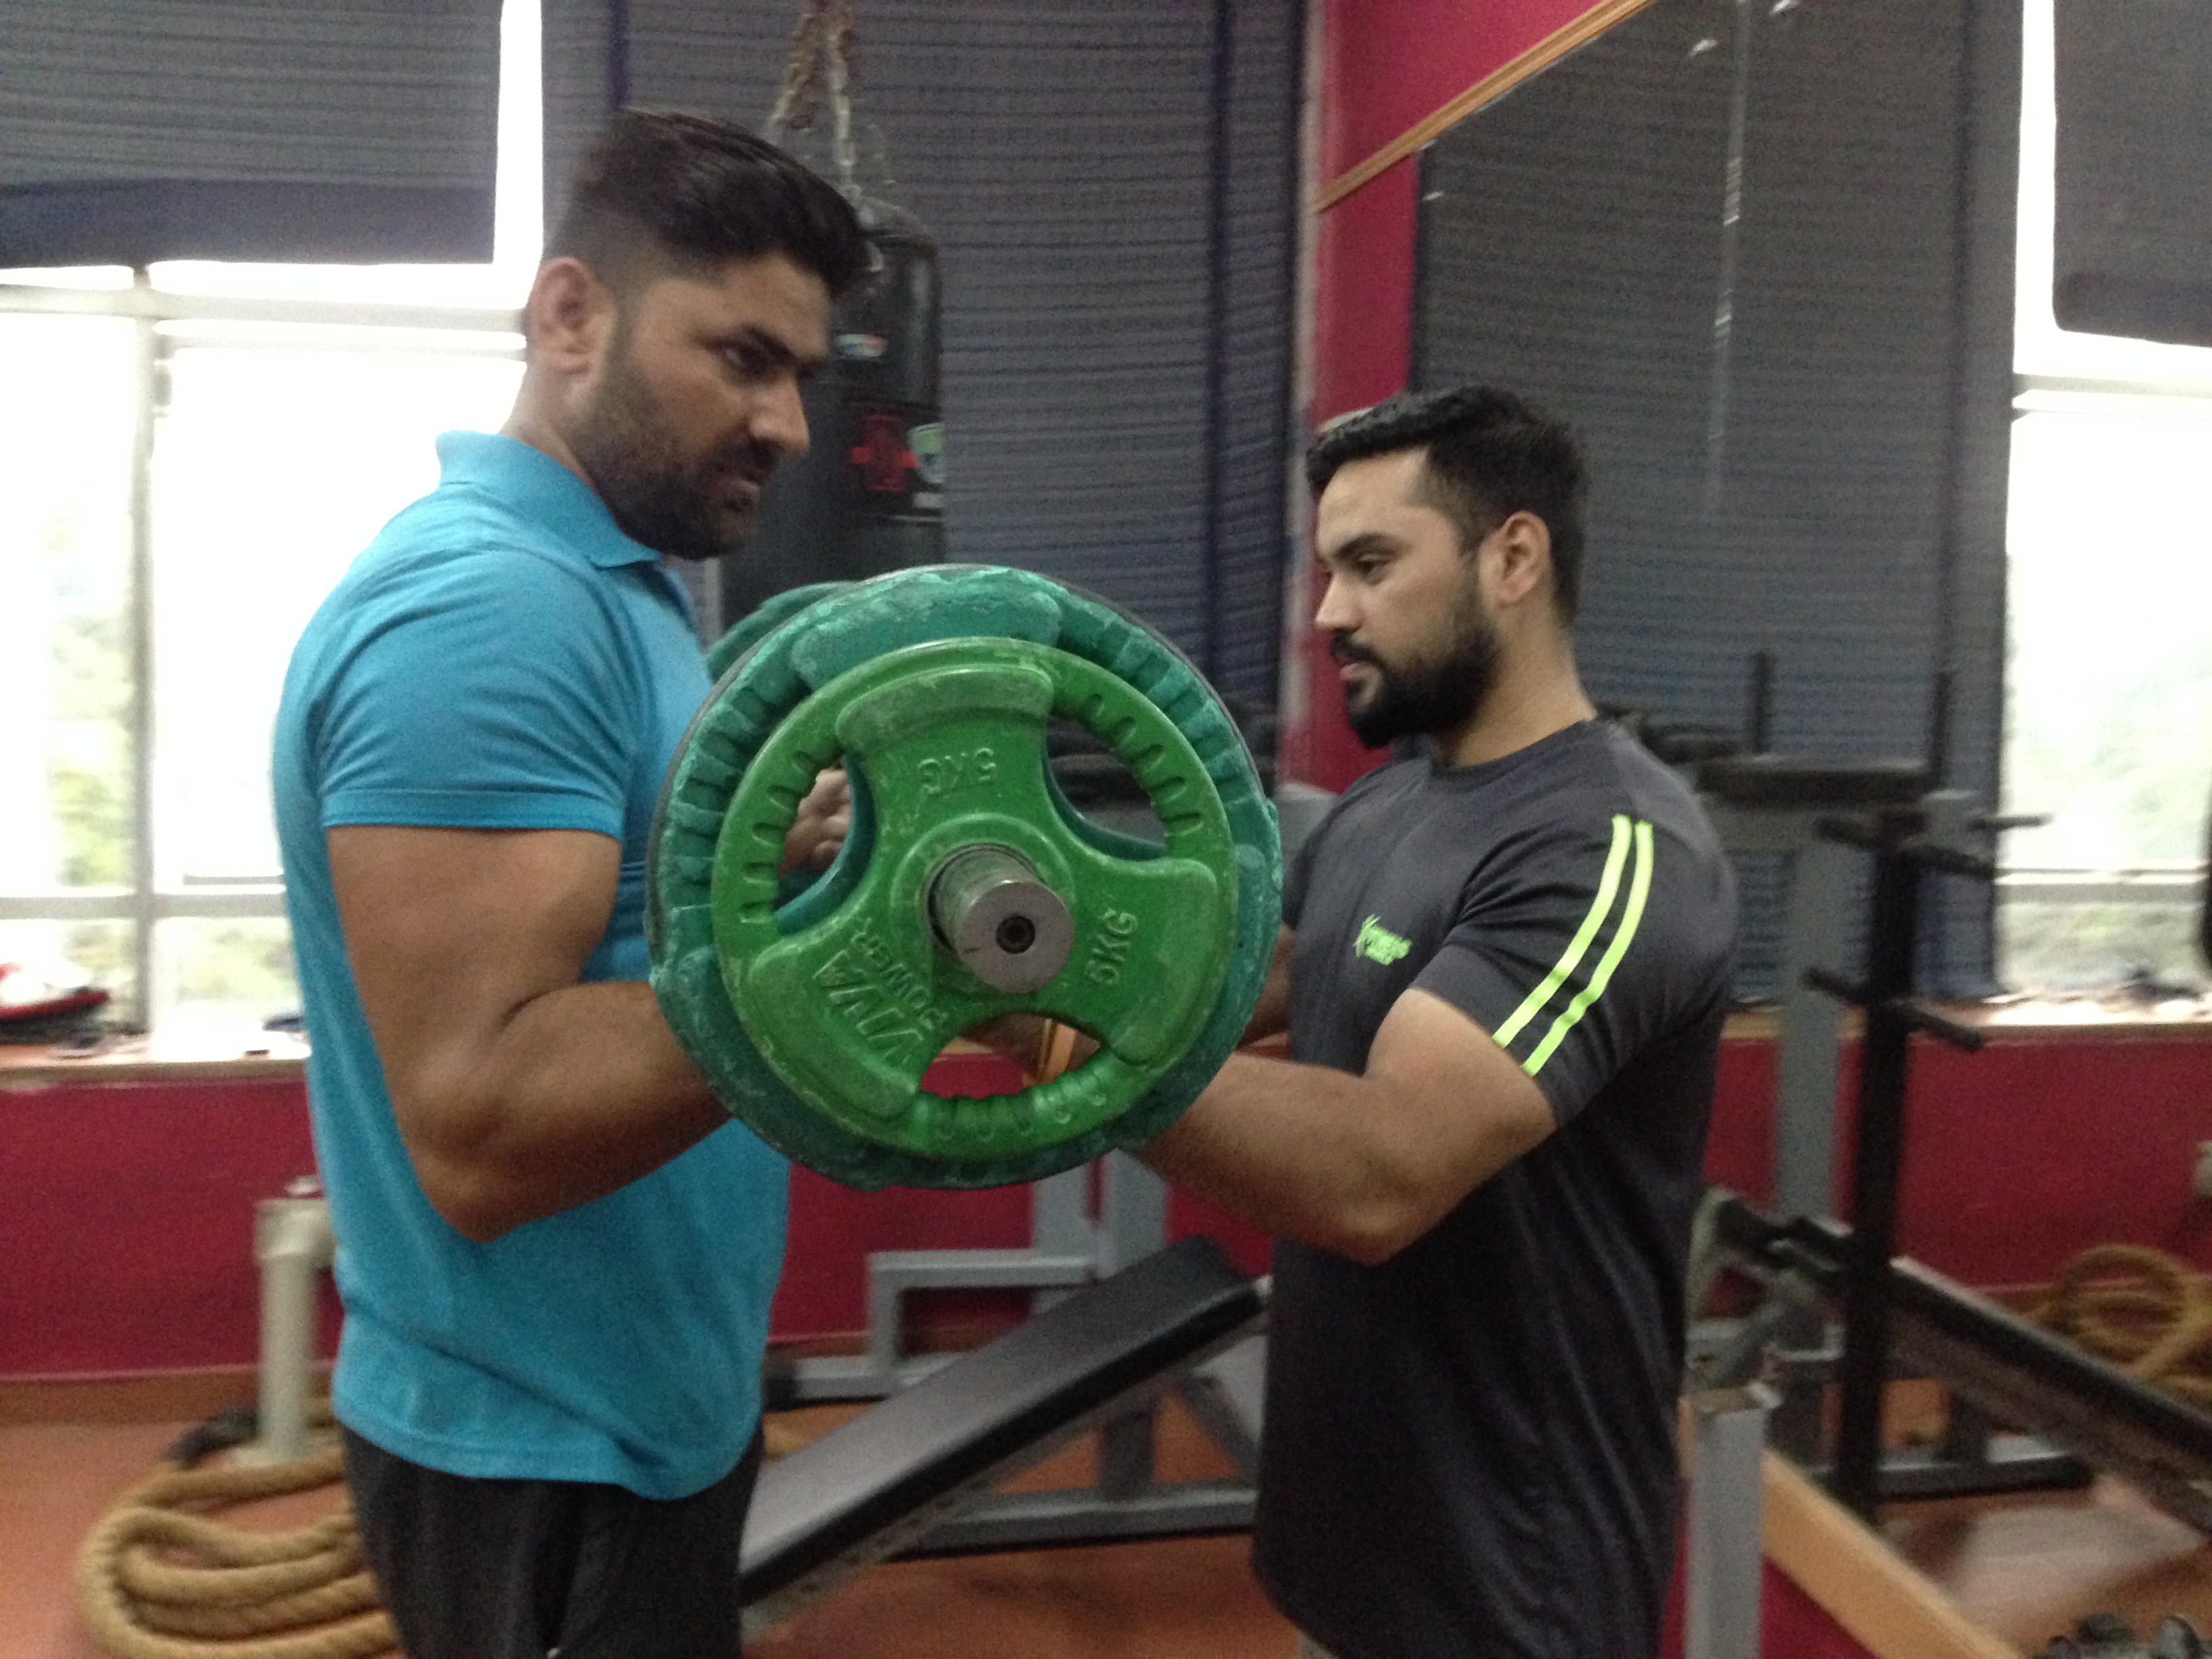 Aesthetic Gym Personal Trainer in Chandigarh Sector 22,Chandigarh - Best  Gyms in Chandigarh - Justdial